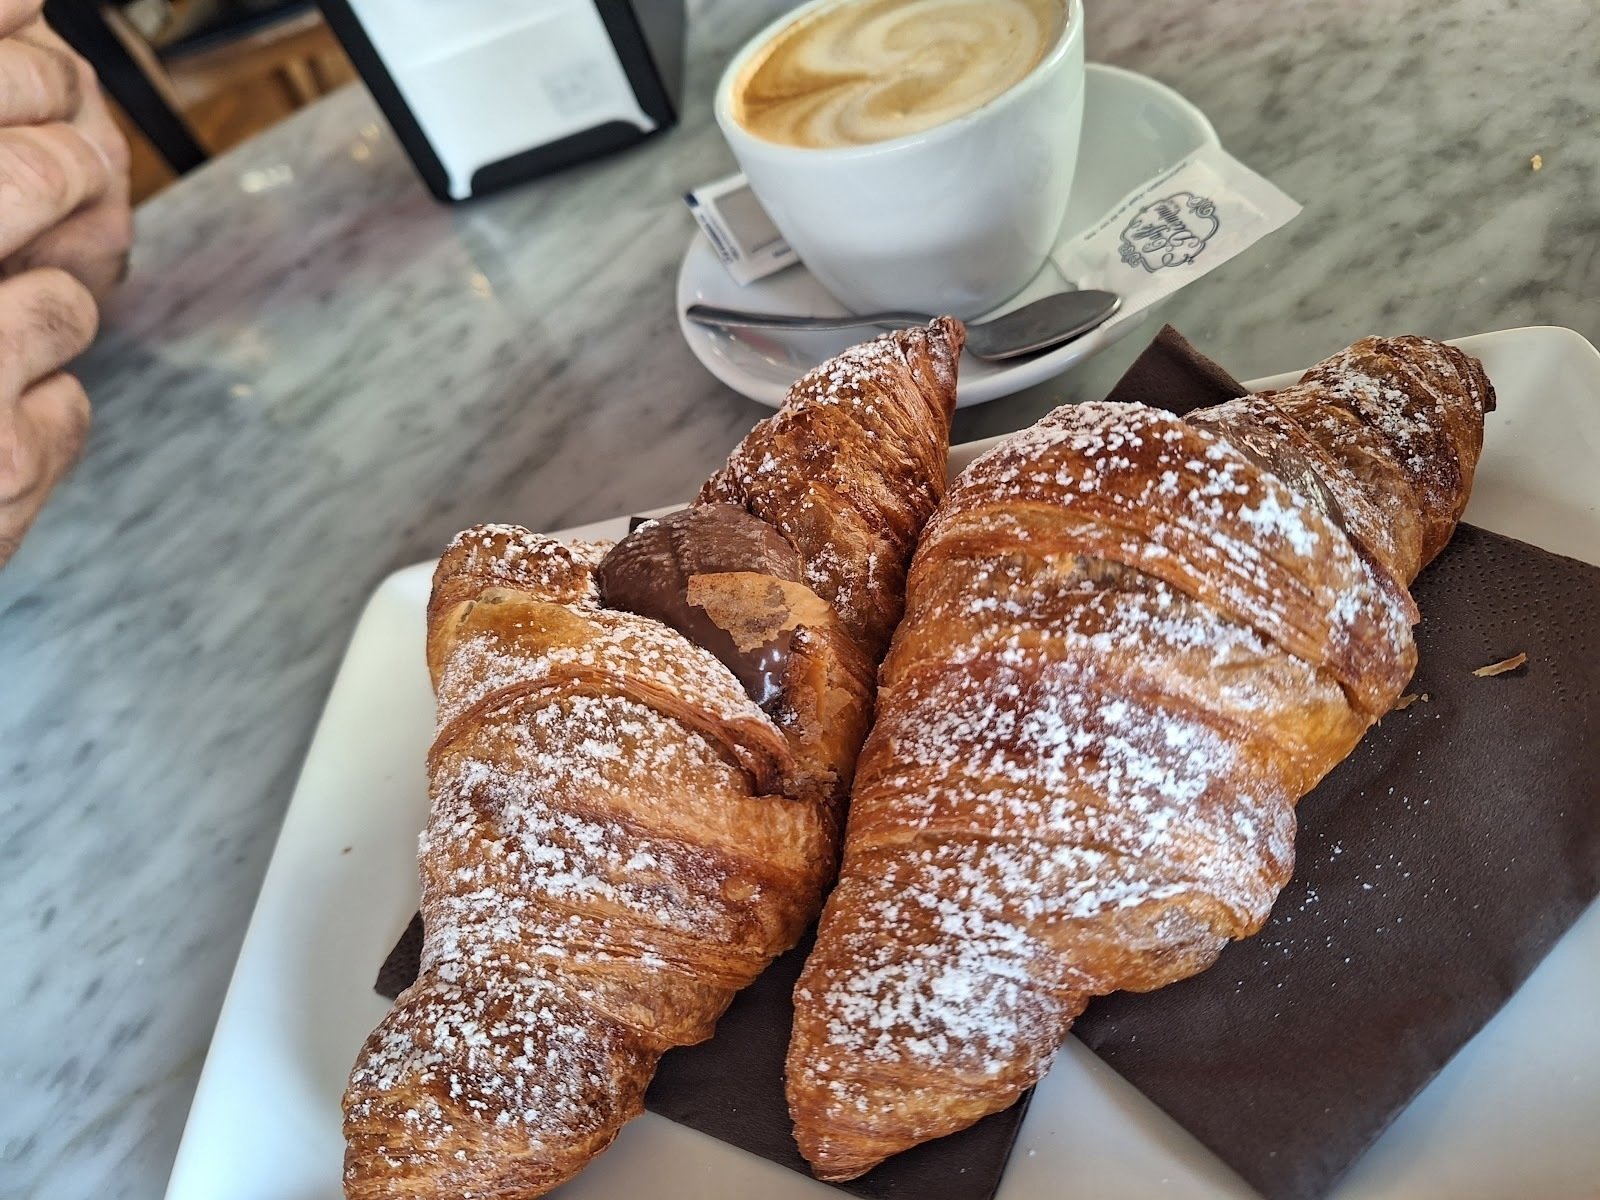 <span class="translation_missing" title="translation missing: en.meta.location_title, location_name: Molino bakery bar &amp; cucina, city: Rome">Location Title</span>